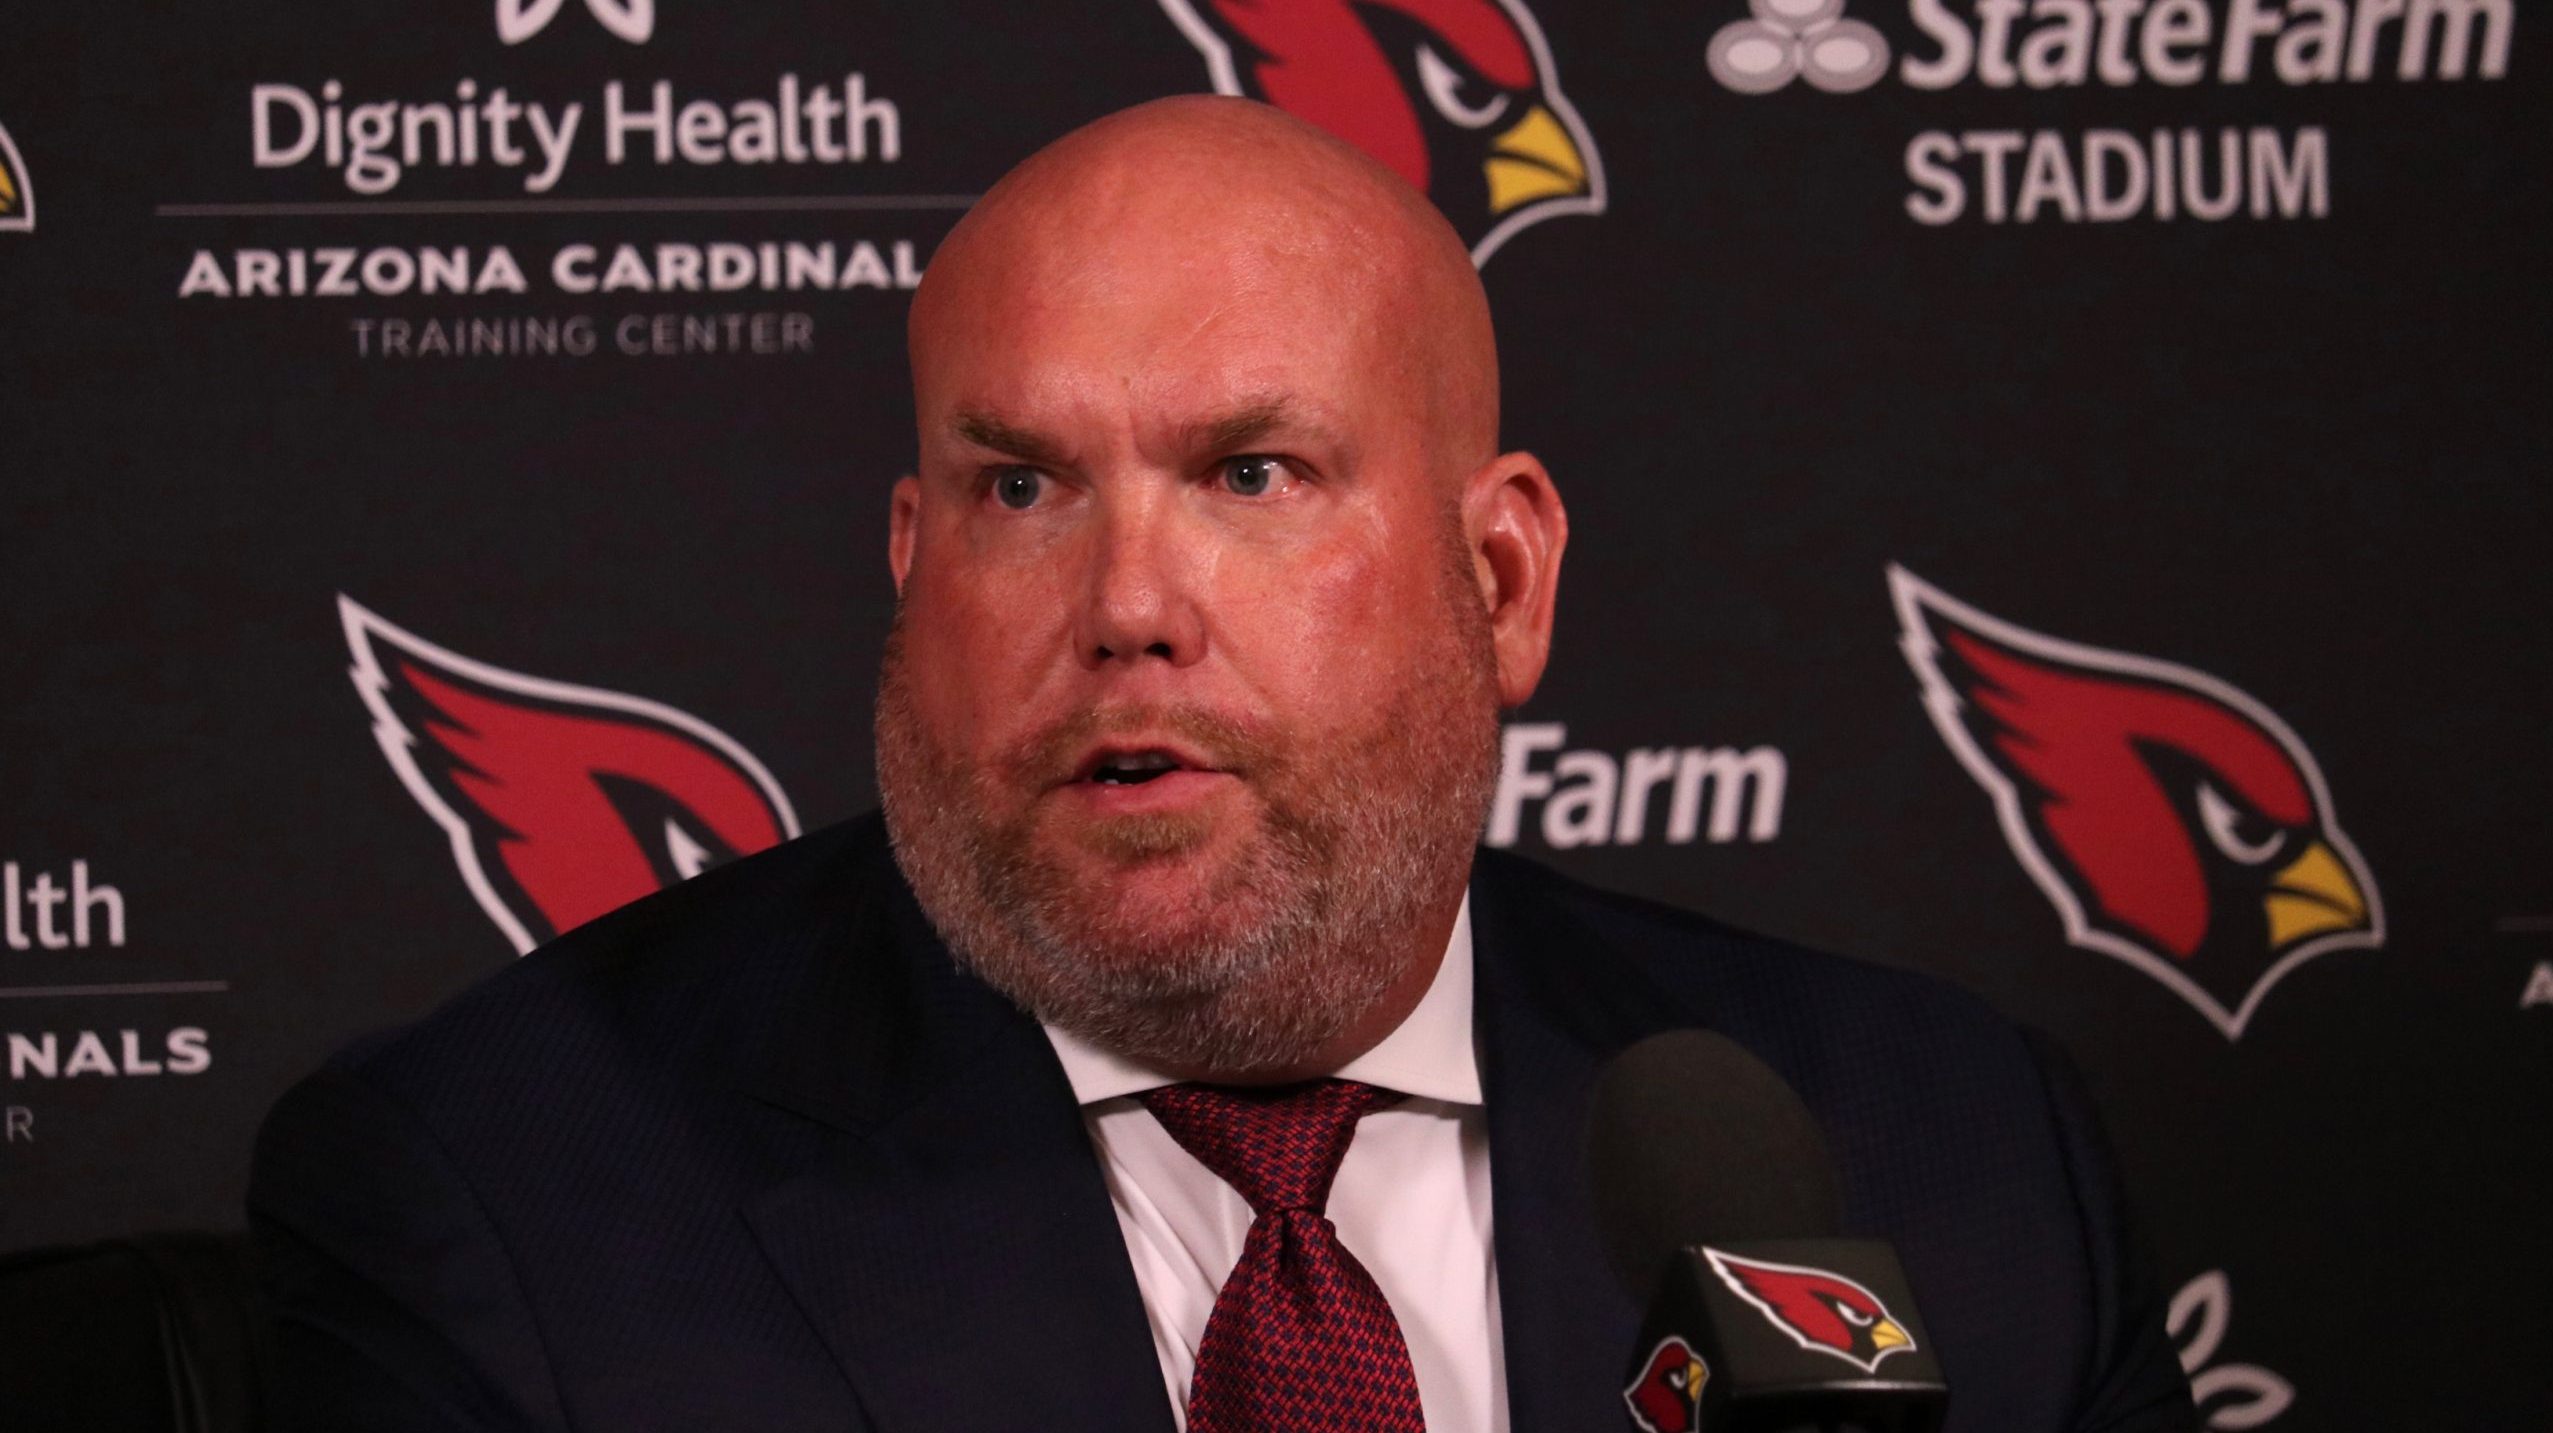 Arizona Cardinals GM Steve Keim meets with the media after Day 1 of the NFL Draft on Thursday, Apri...